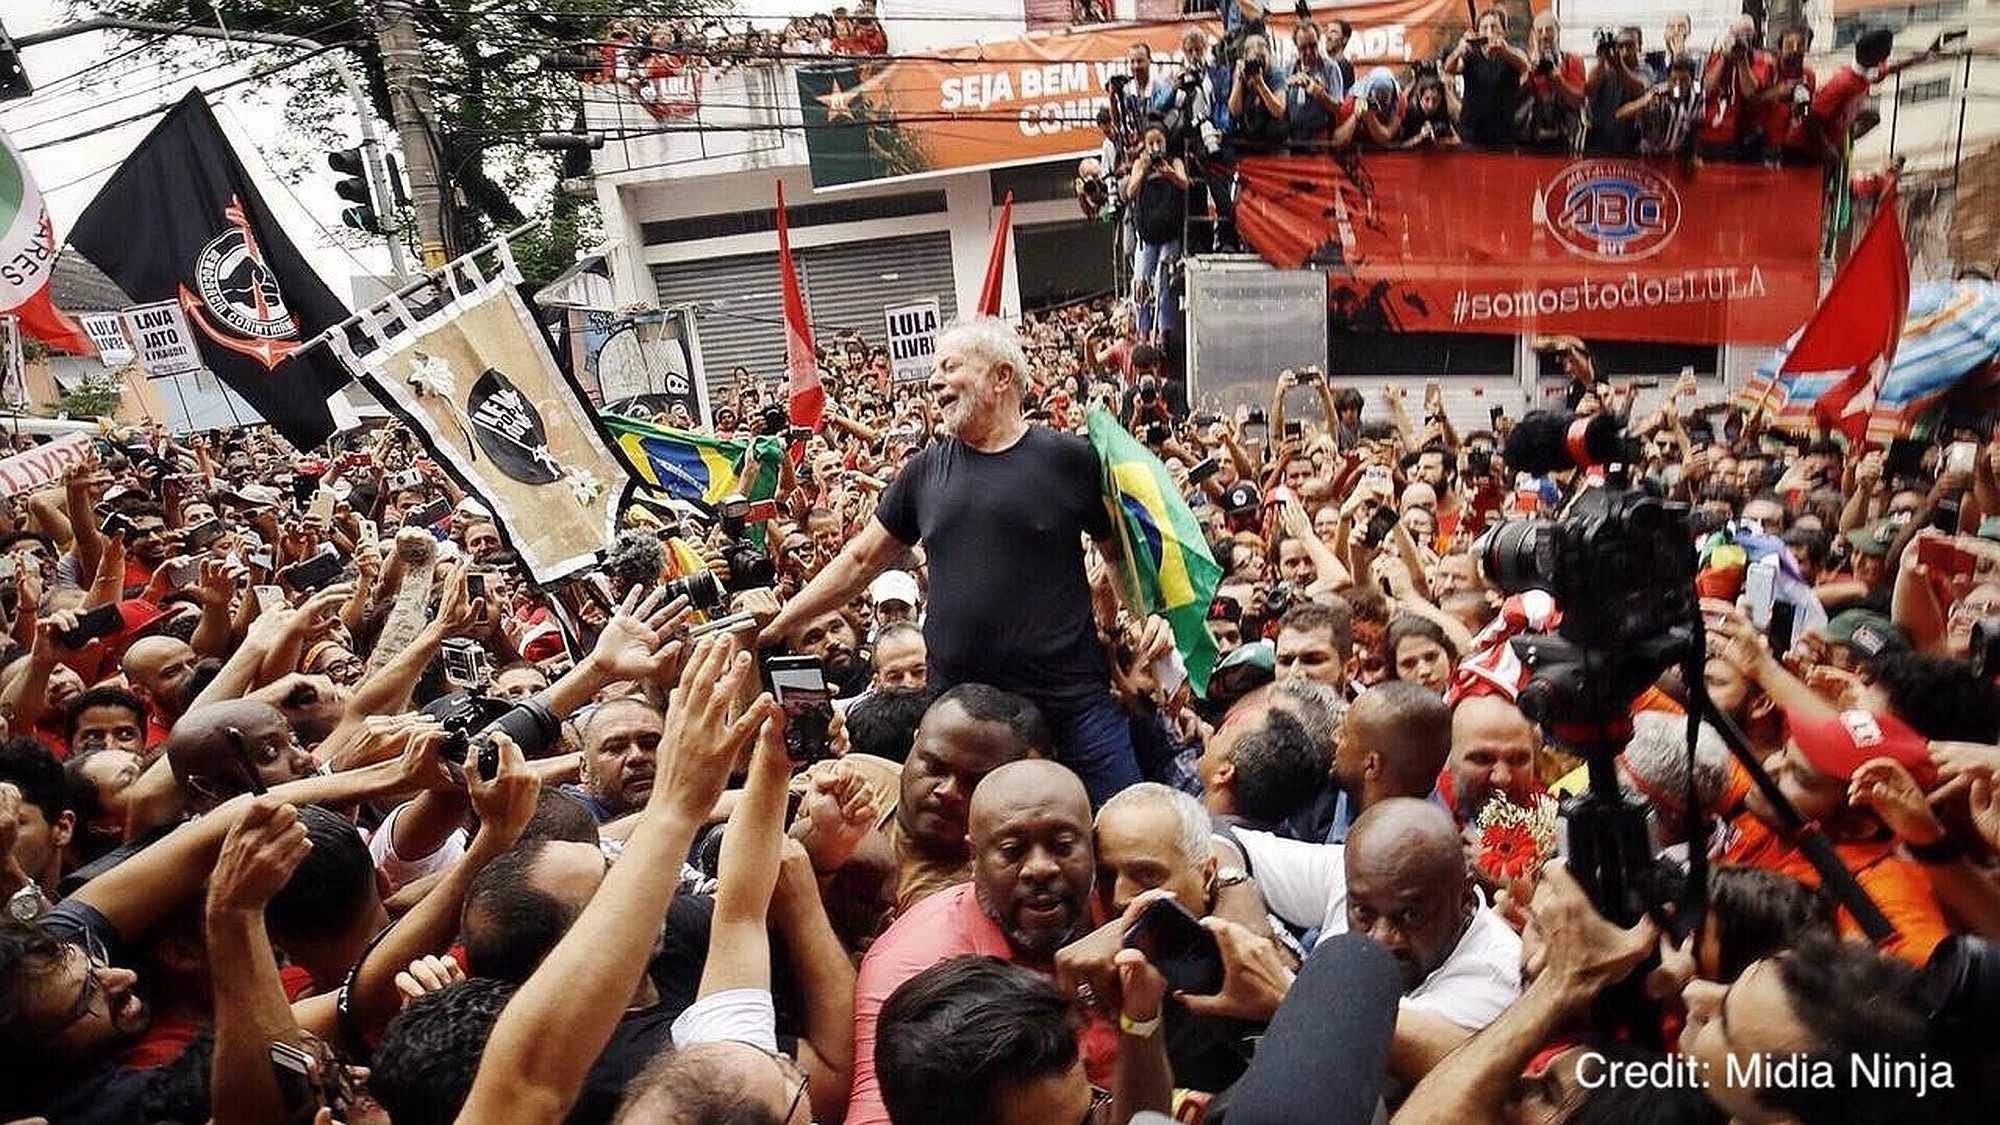 Lula being carried by his fans after leaving prison